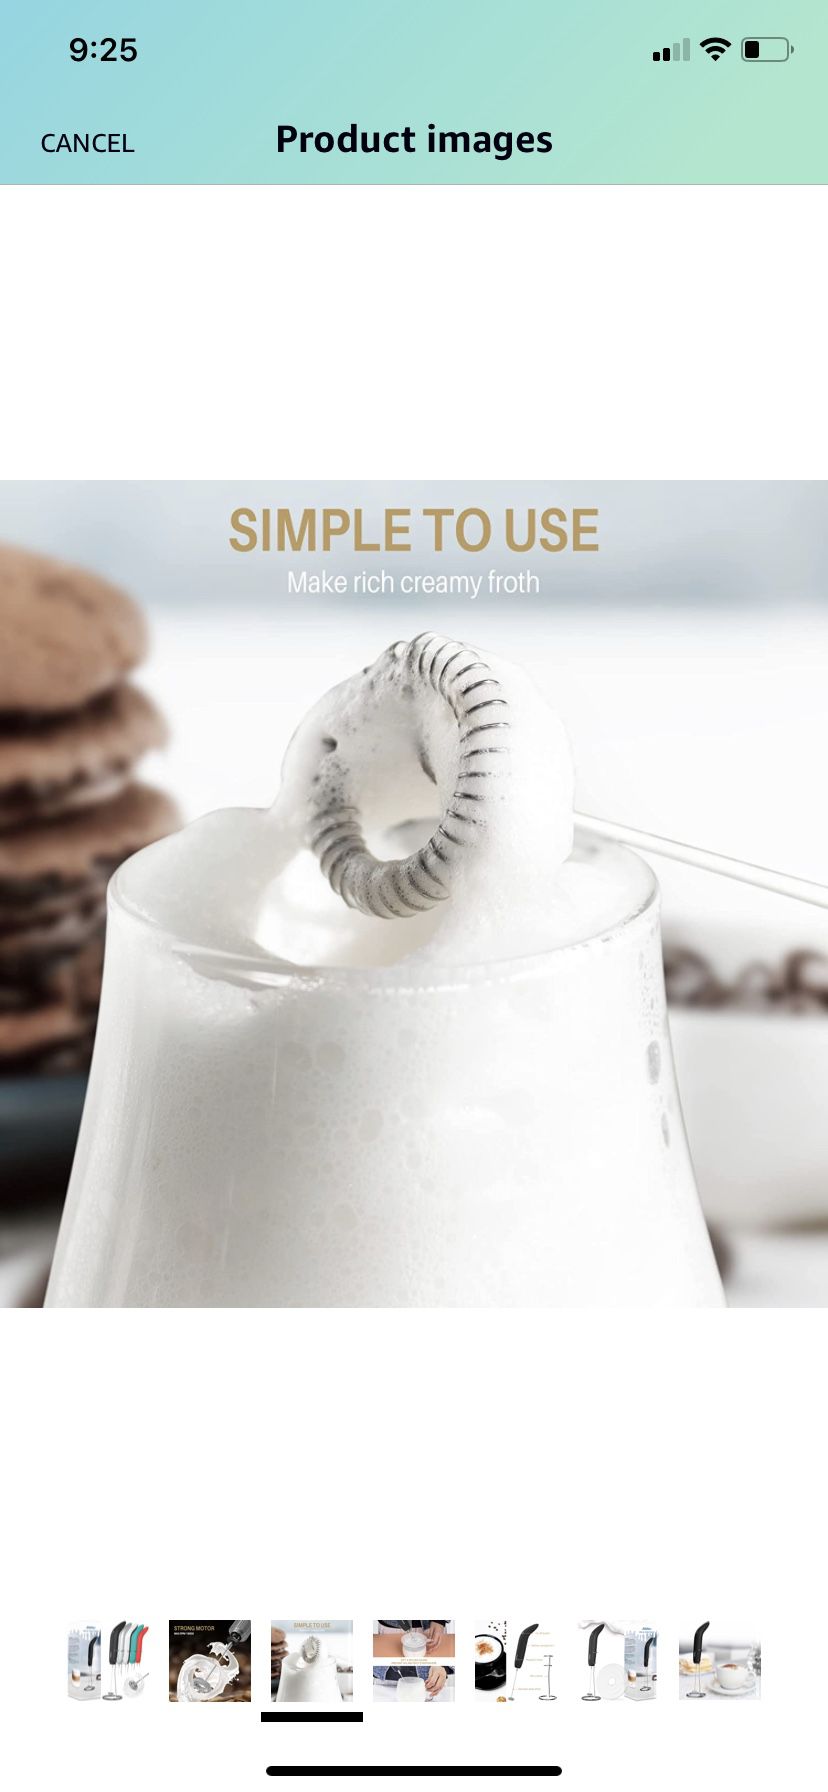 Electric Hand Mixer/ Handheld Milk Frother, by Shopping360